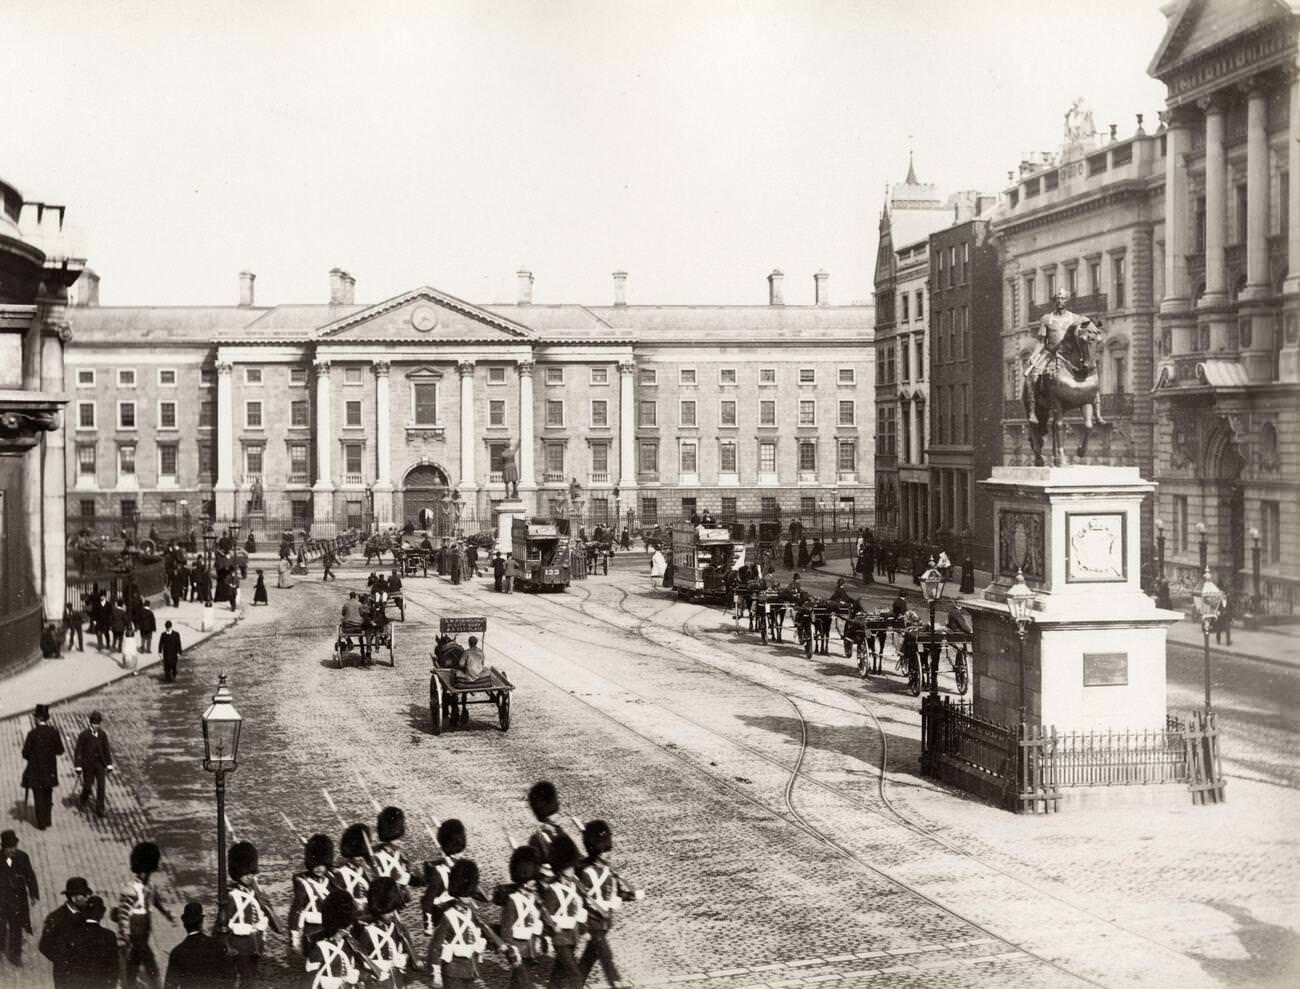 British soldiers marching outside the front gate of Trinity College Dublin, Ireland, 1890s